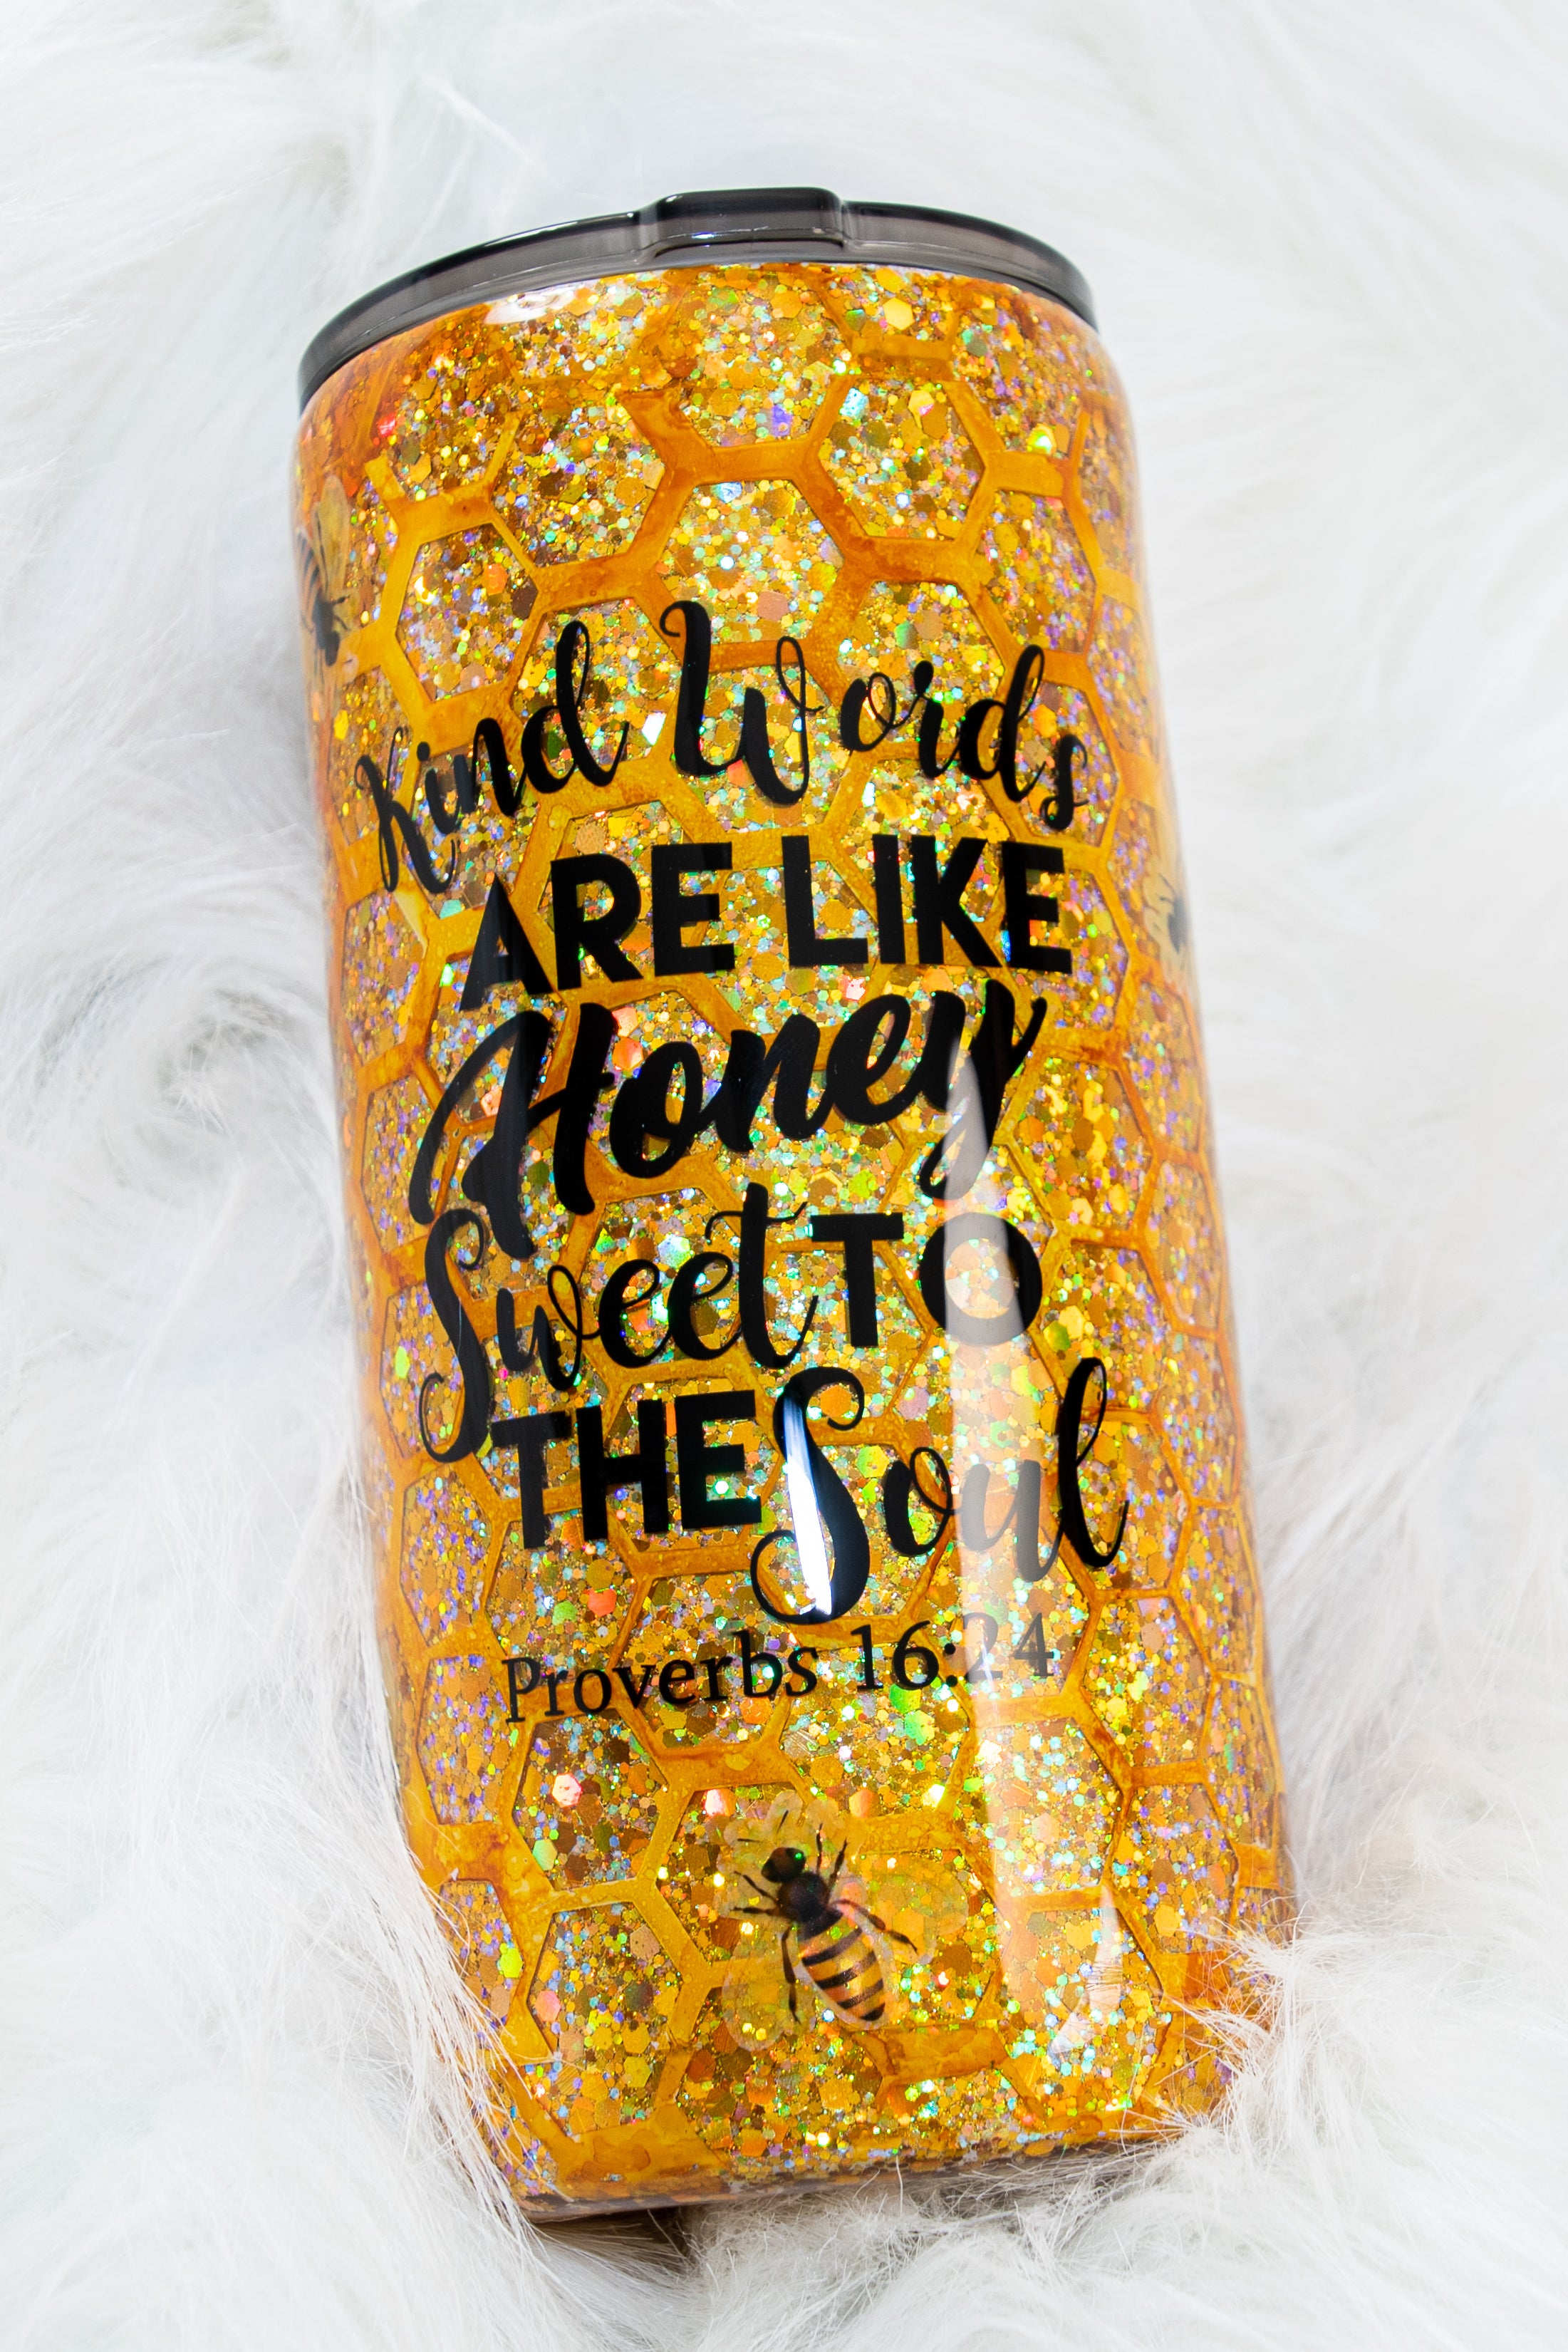 Kind Words Are Like Honey Sweet To The Soul ~ Gold Glittered 22 ounce Stainless Steel Tumbler